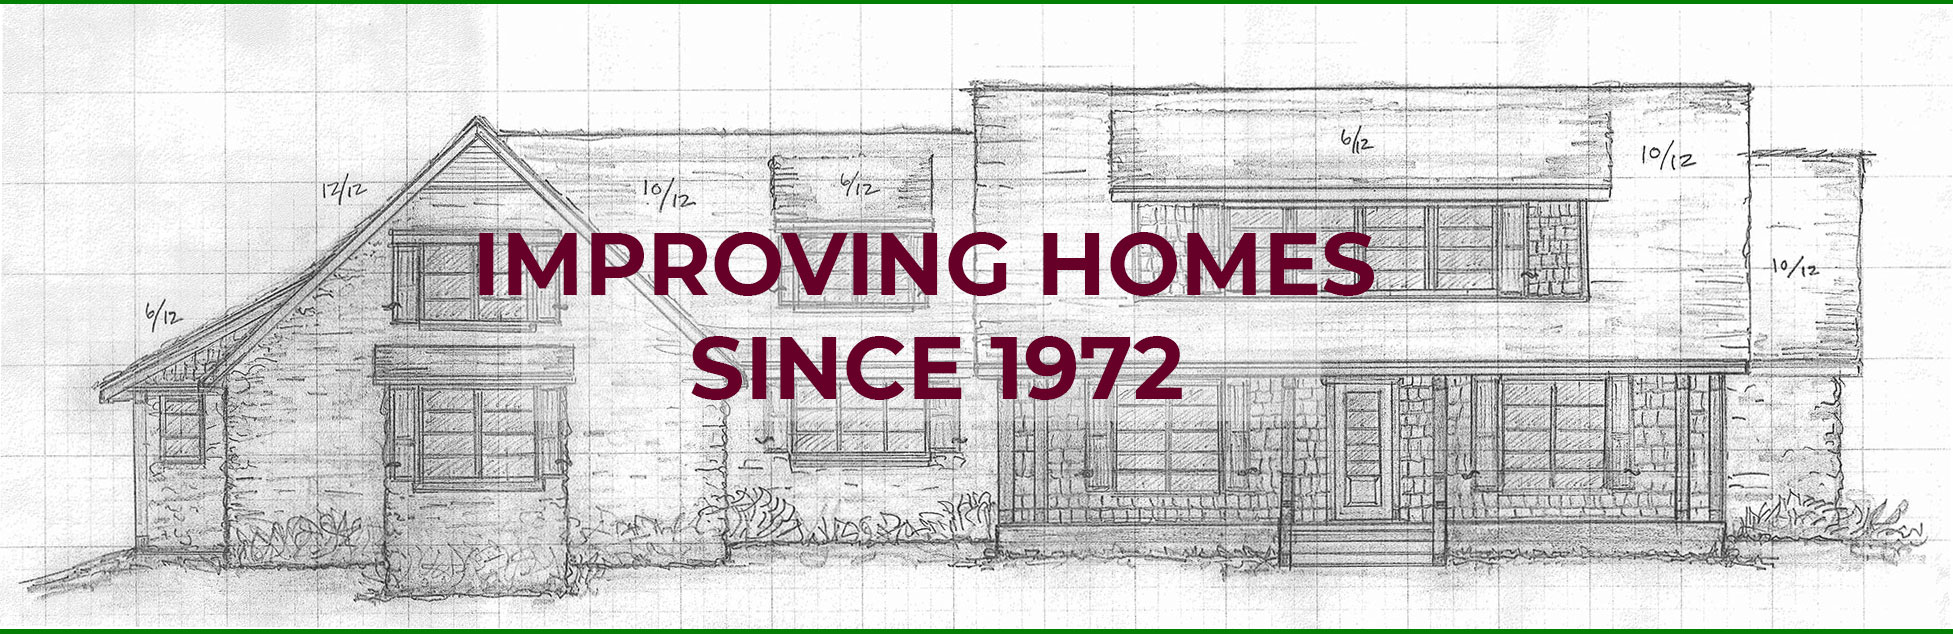 Improving Homes Since 1972